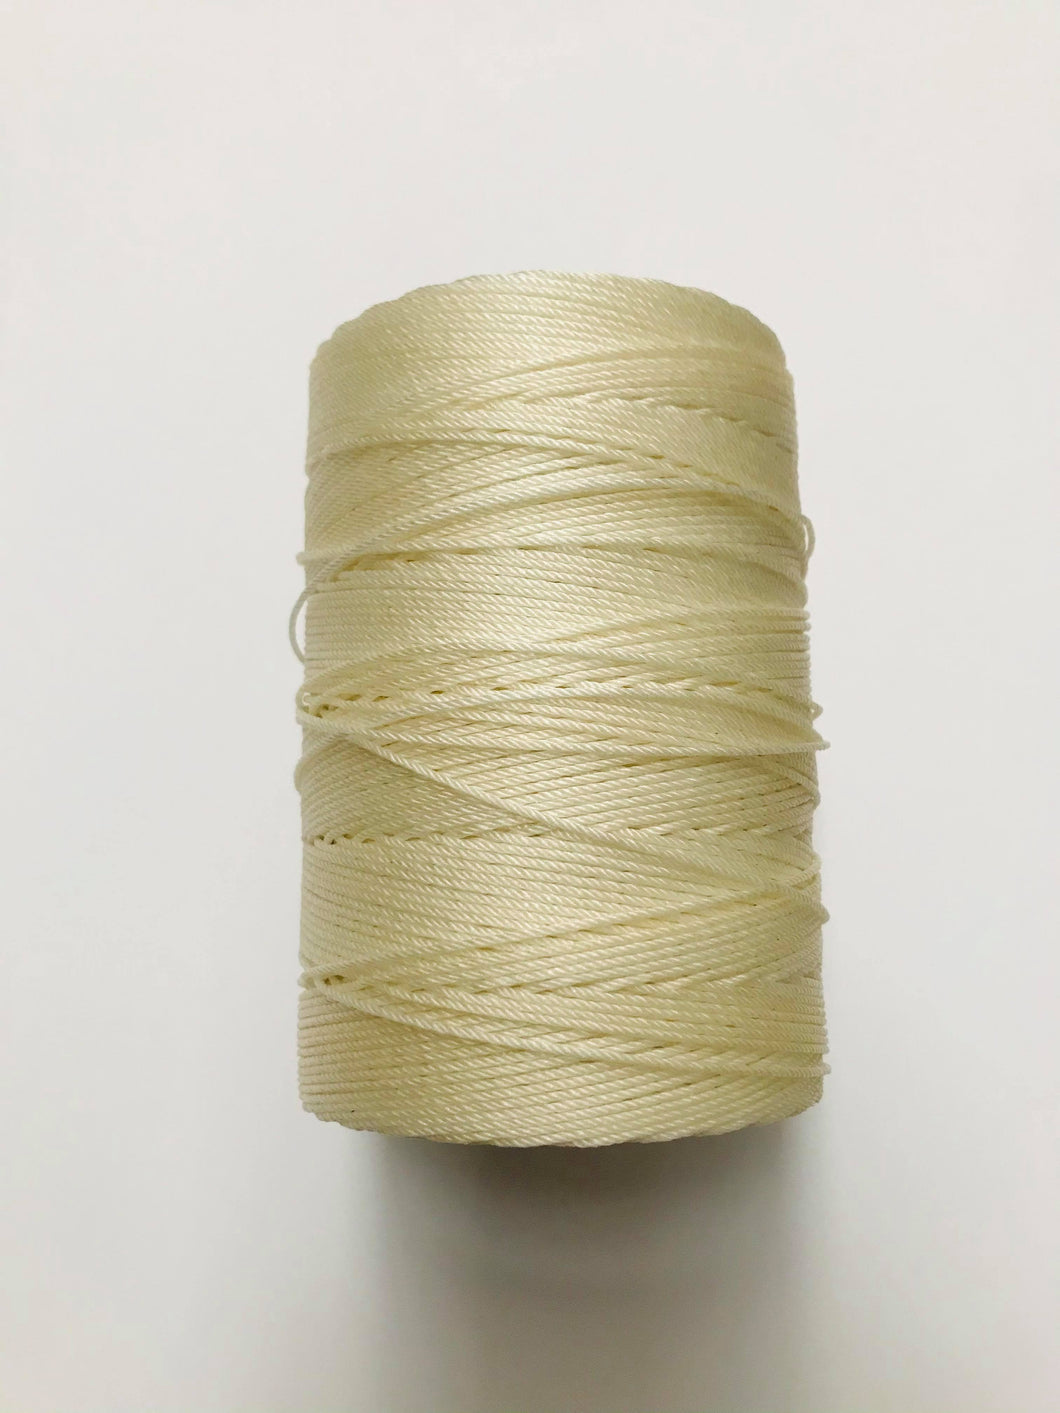 Nylon button twine is very strong and slip resistant. Ideal for use to attach buttons to chairs and other furniture, including beds and headboards etc. 